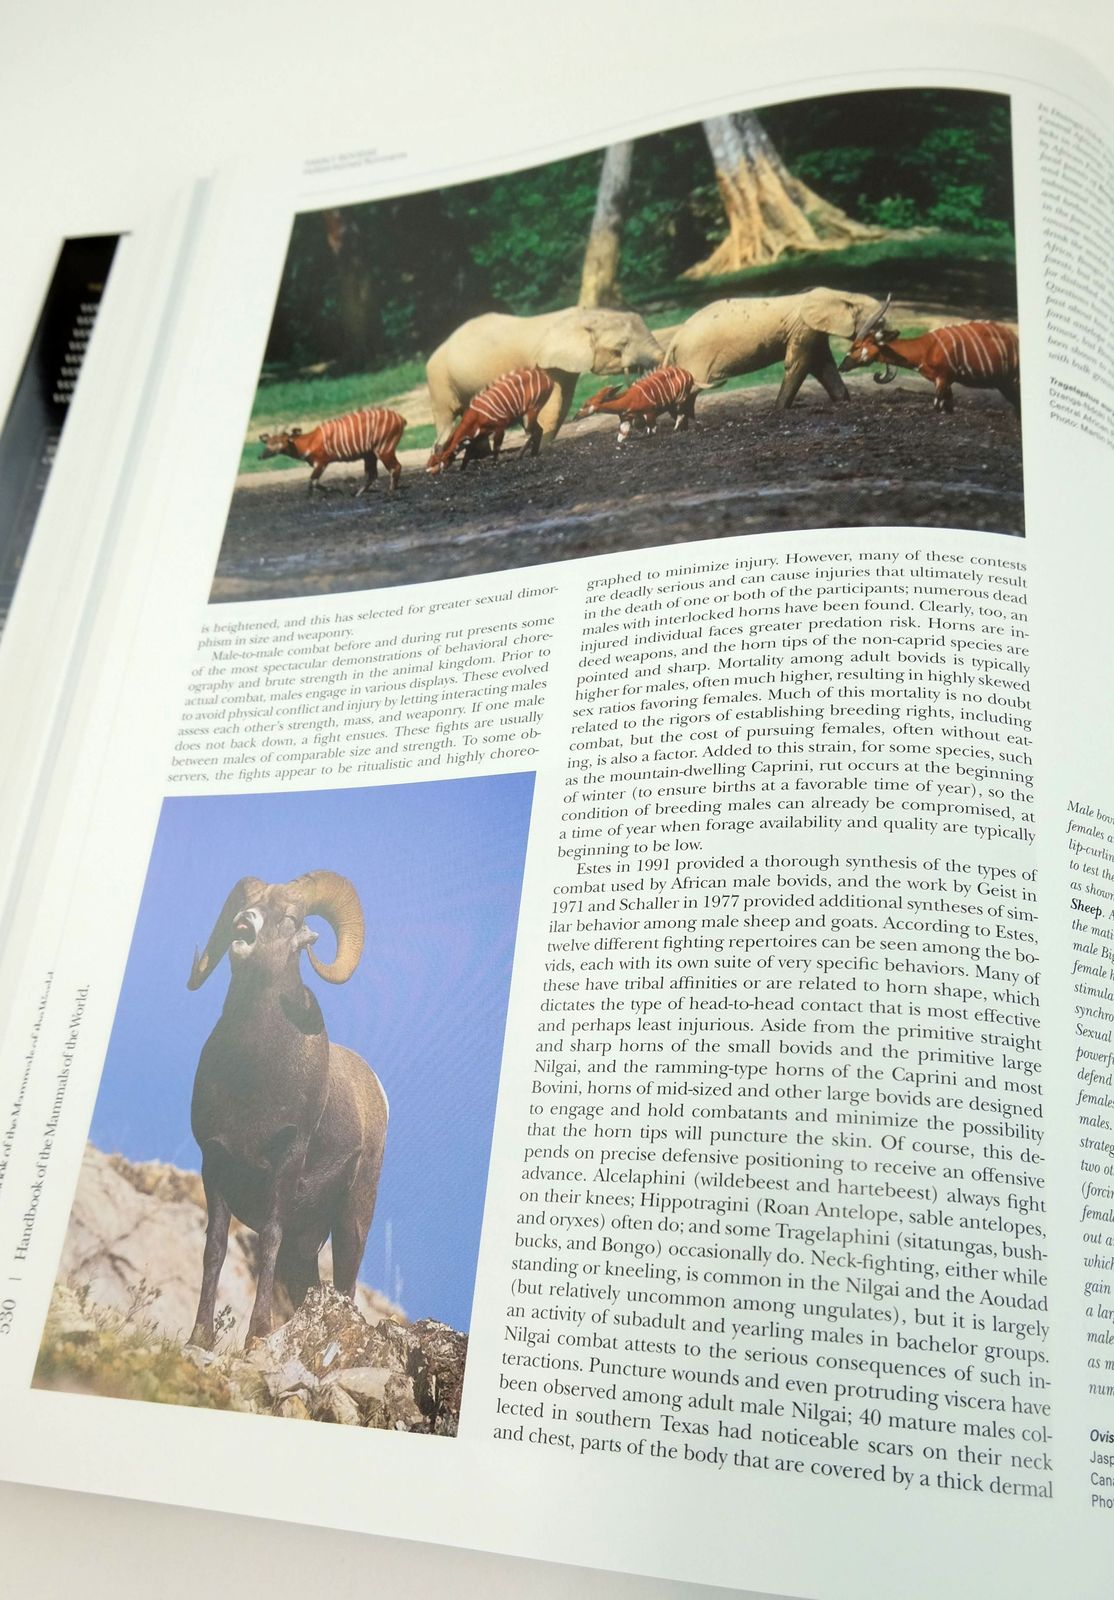 Photo of HANDBOOK OF THE MAMMALS OF THE WORLD 2. HOOFED MAMMALS written by Wilson, Don E.
Mittermeier, Russell A.
et al,  published by Lynx Edicions (STOCK CODE: 1820164)  for sale by Stella & Rose's Books